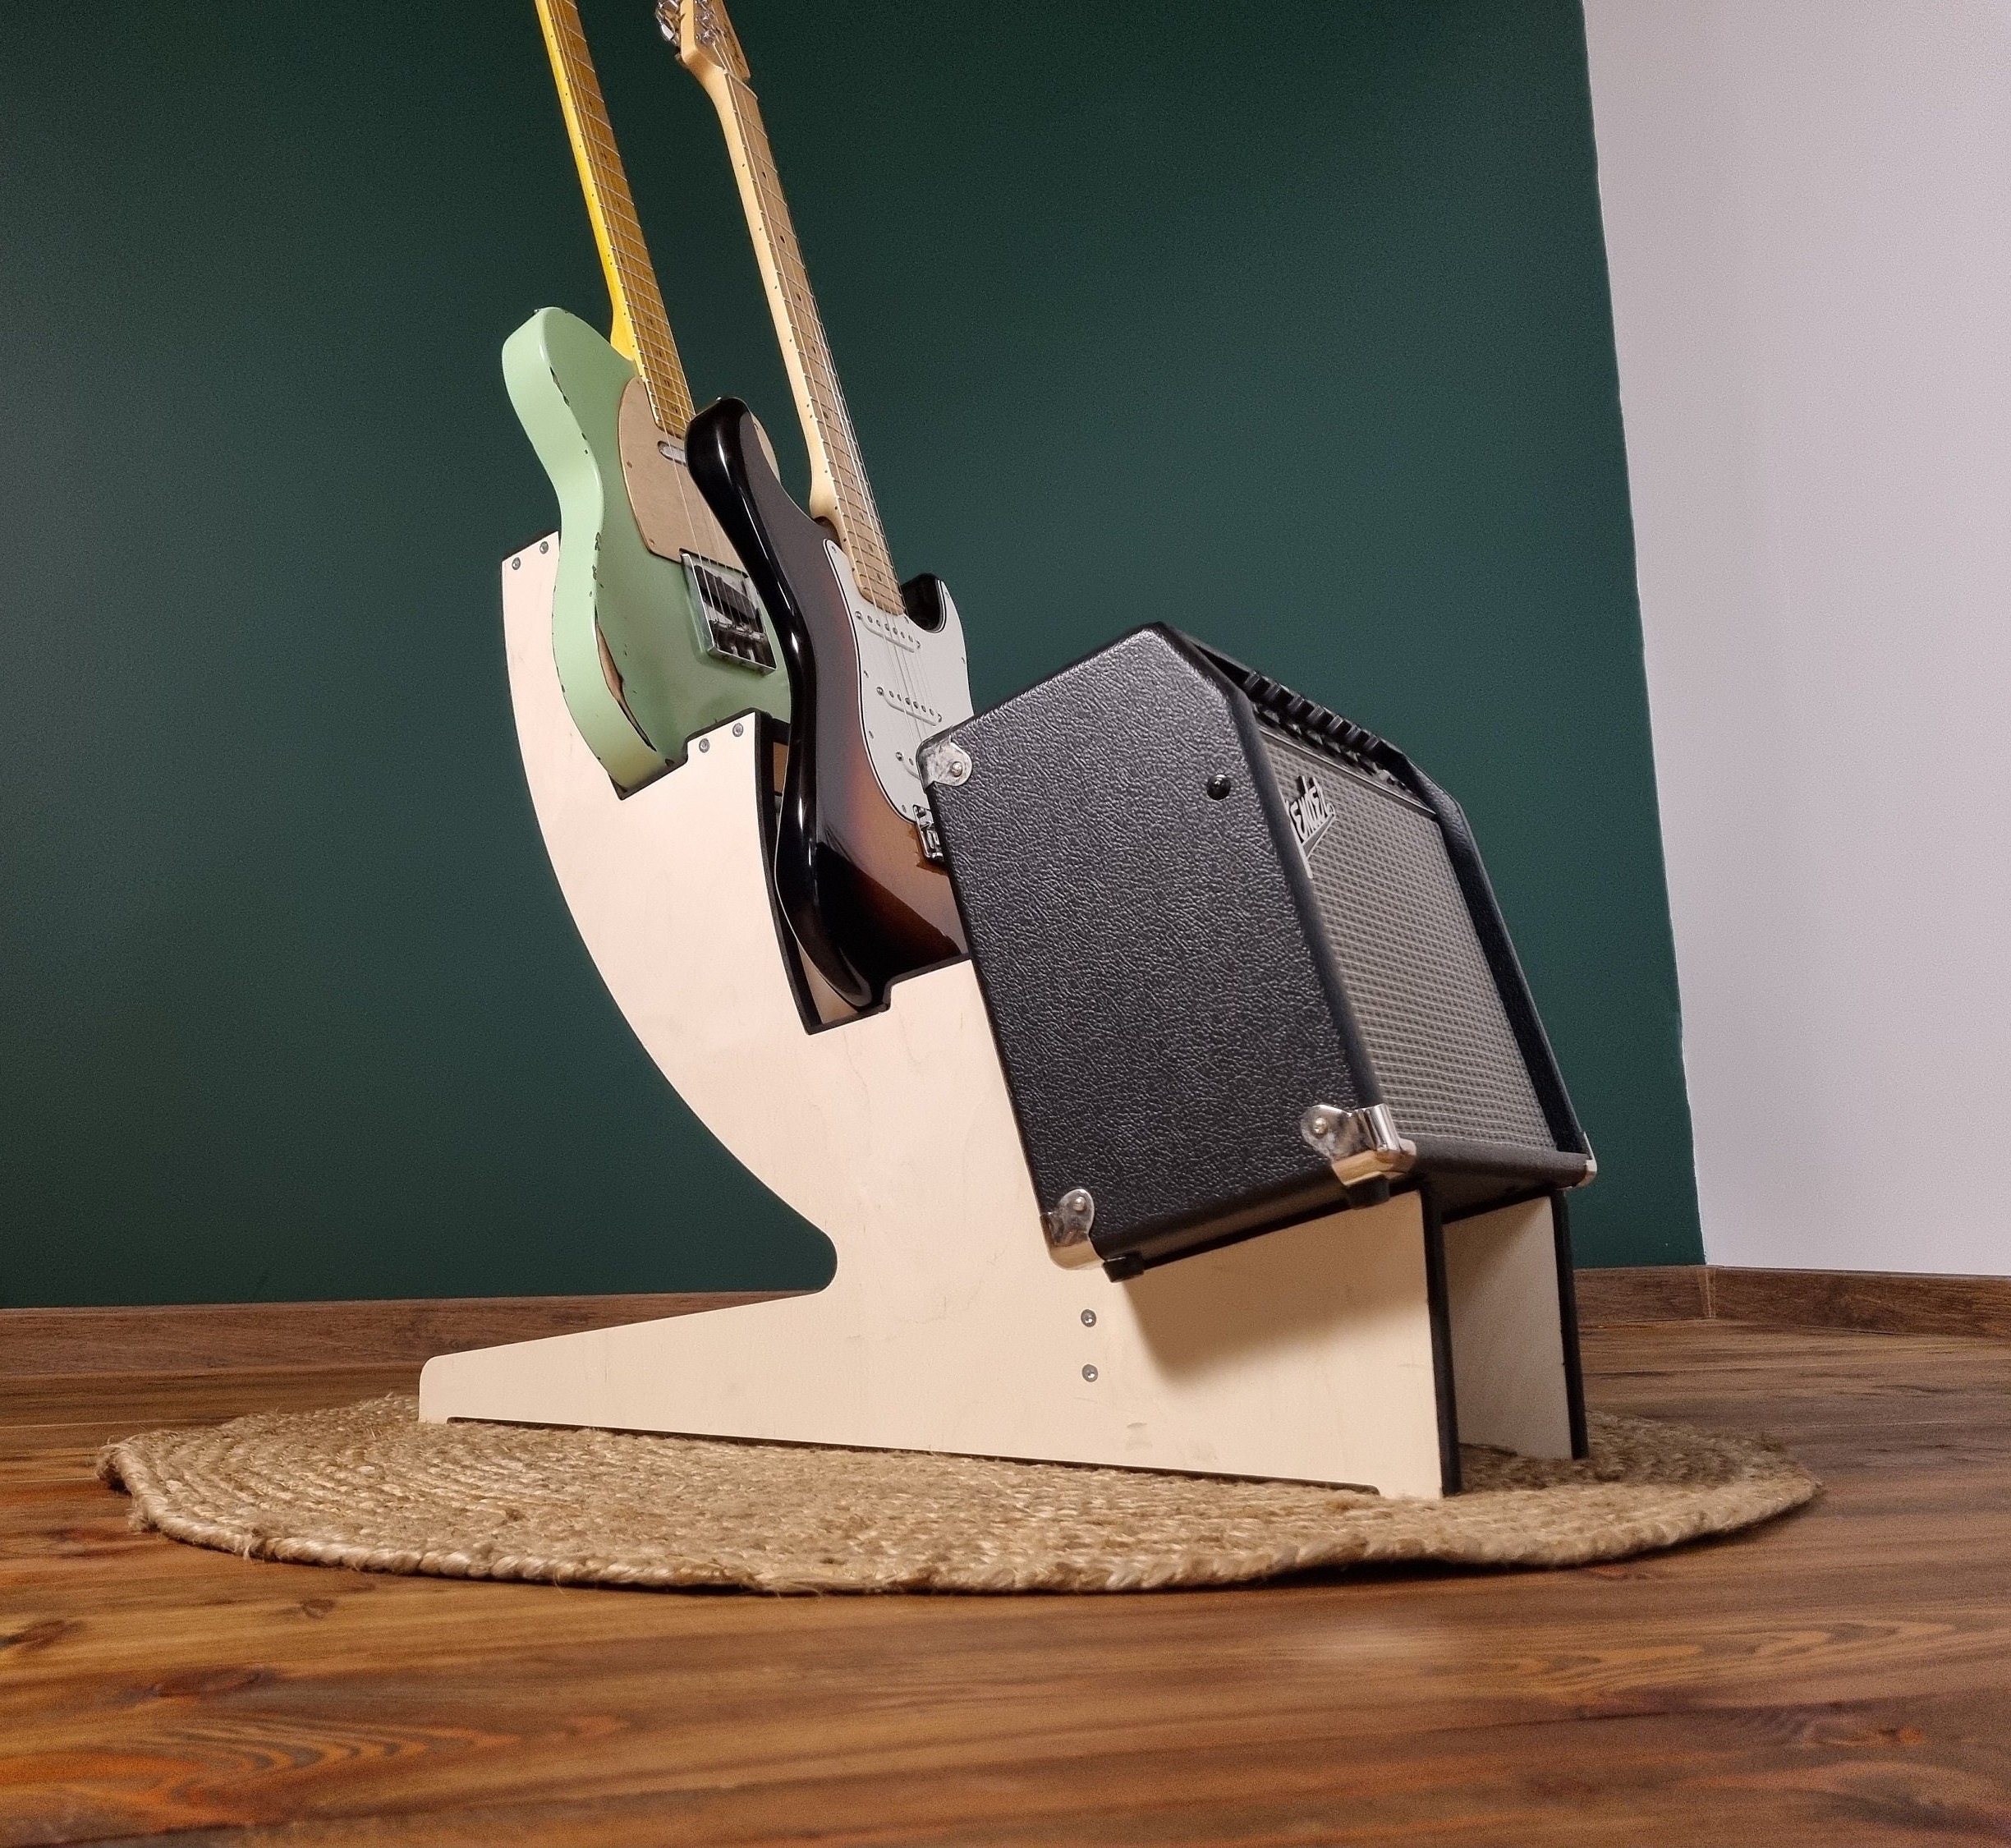 Fender® Classic Series Case Stand - 3 Guitar